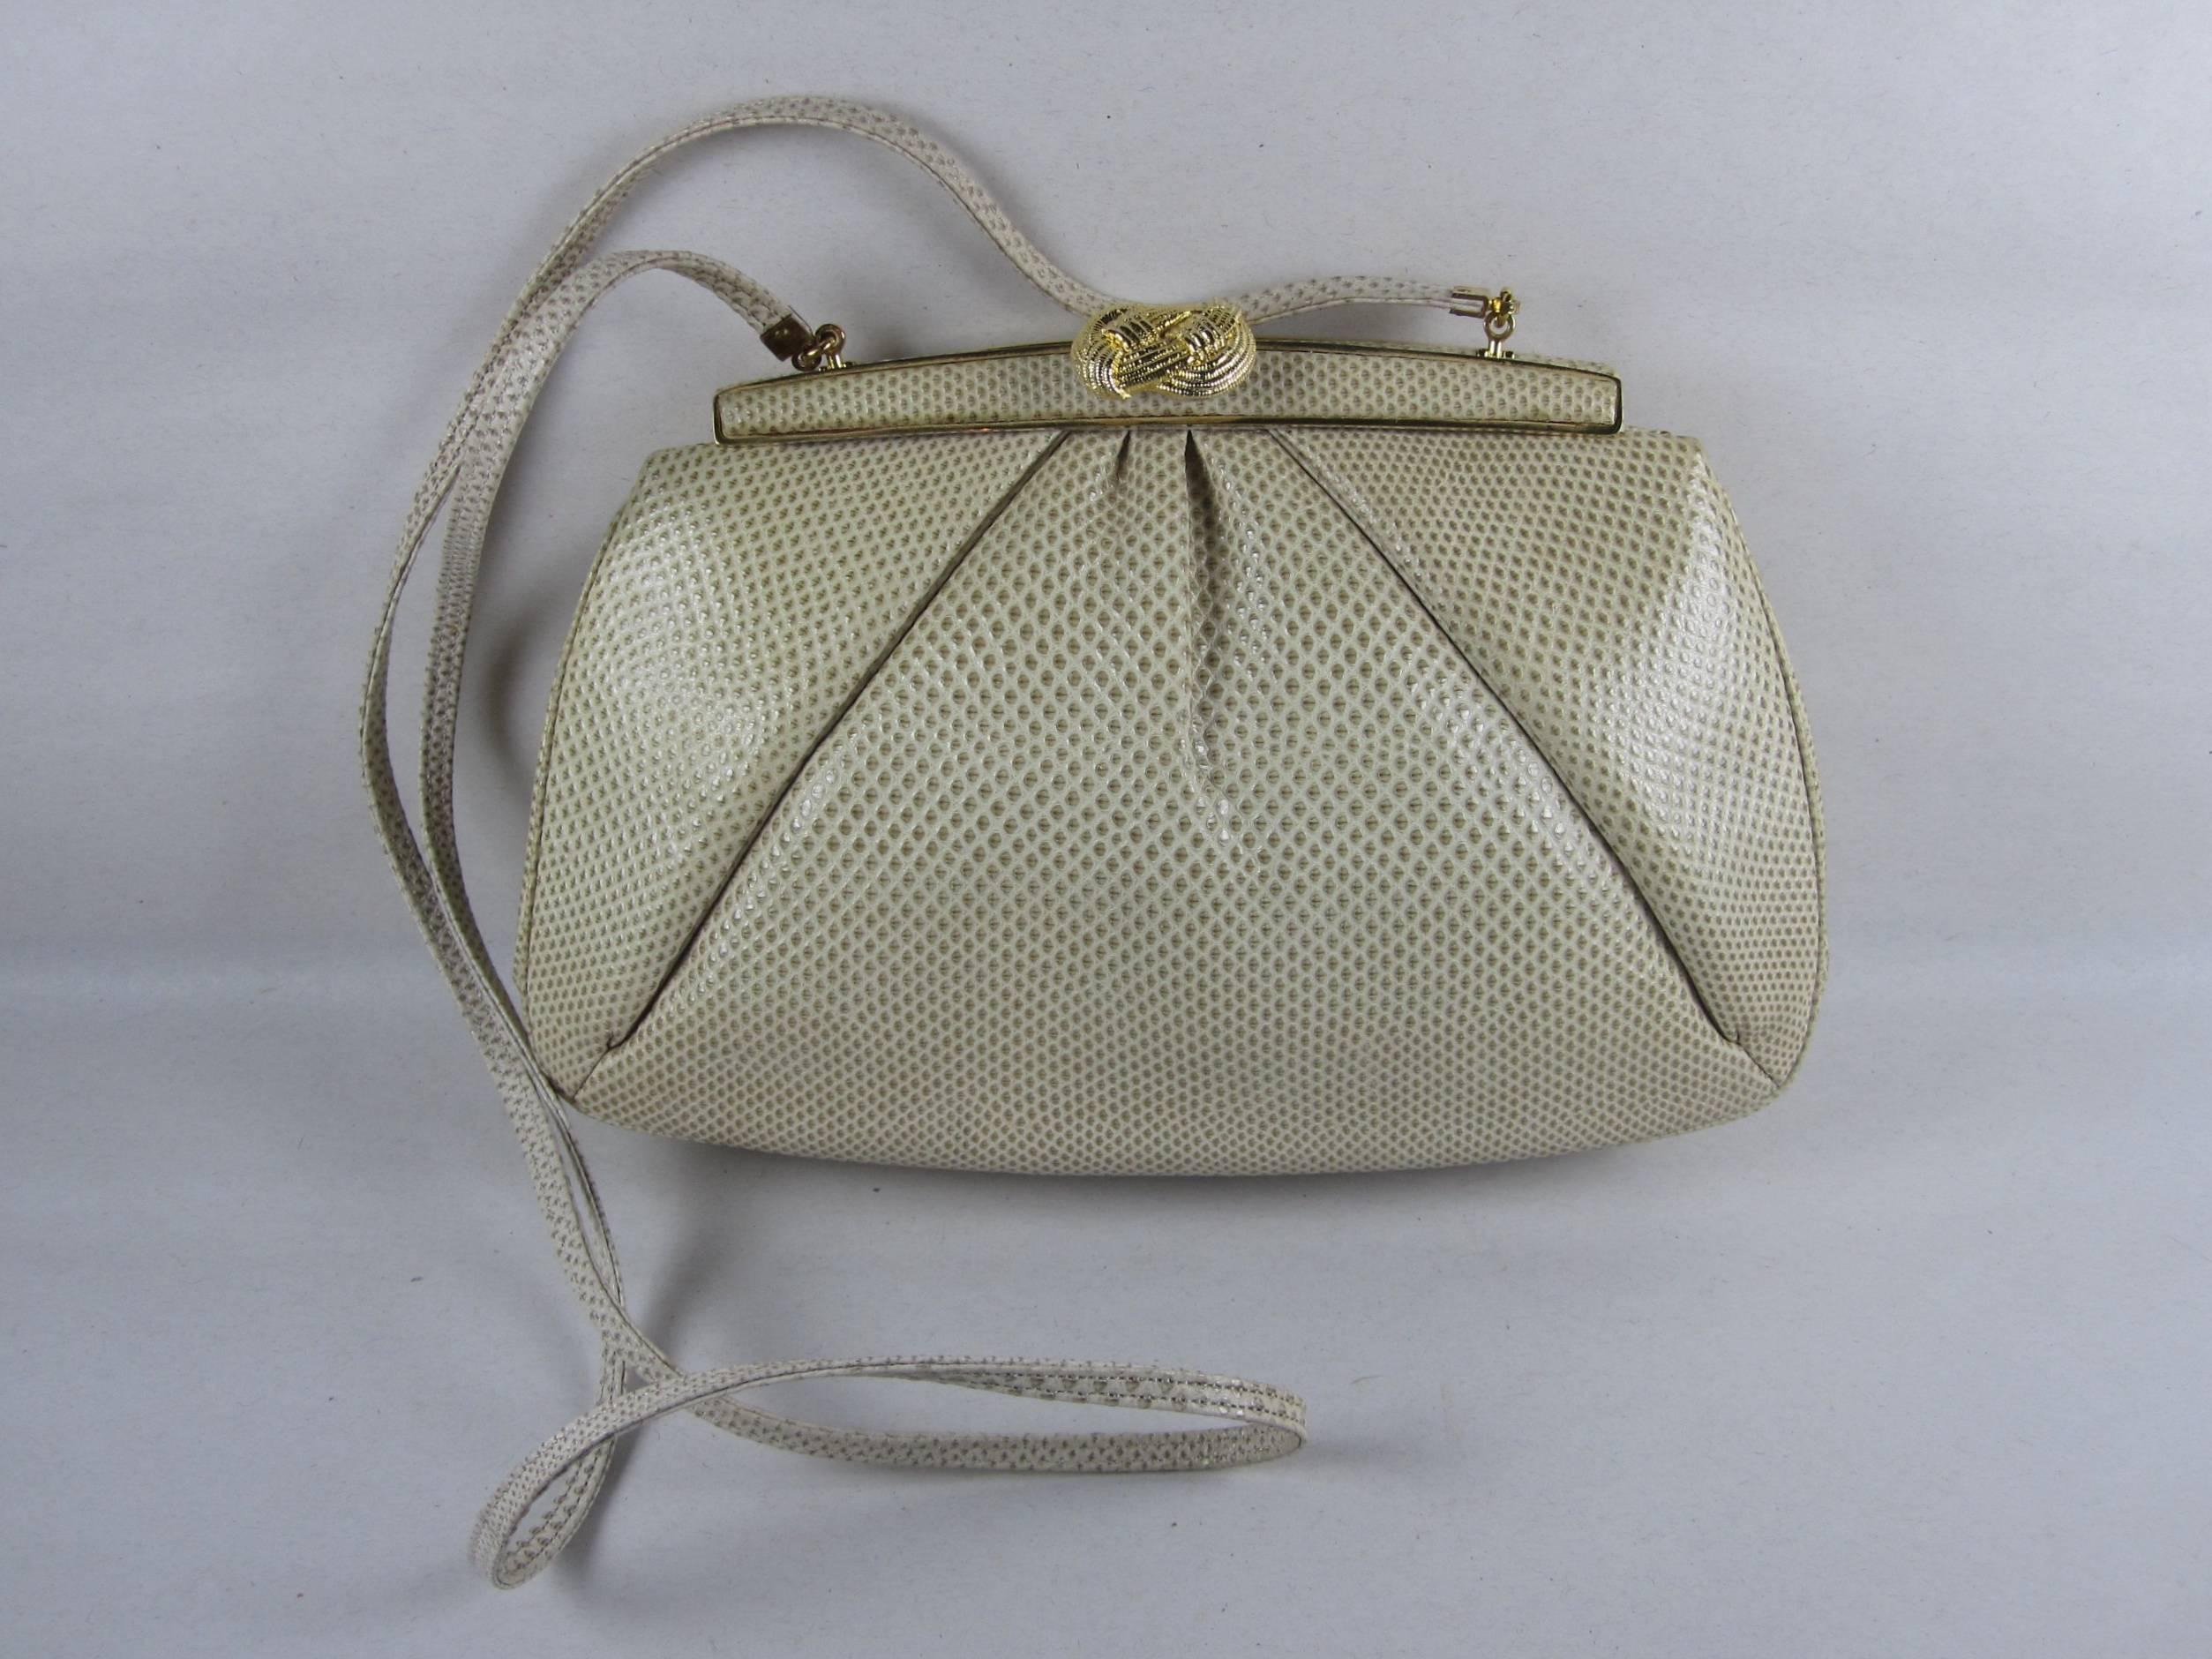 A Judith Leiber 1980's Vintage Taupe Lizard evening bag with a Gold-tone Knot clasp, metal trim and hinge, and a tuck-away lizard strap. Interior zippered compartment and side pocket. Comes with the duster bag and the original box. Excellent